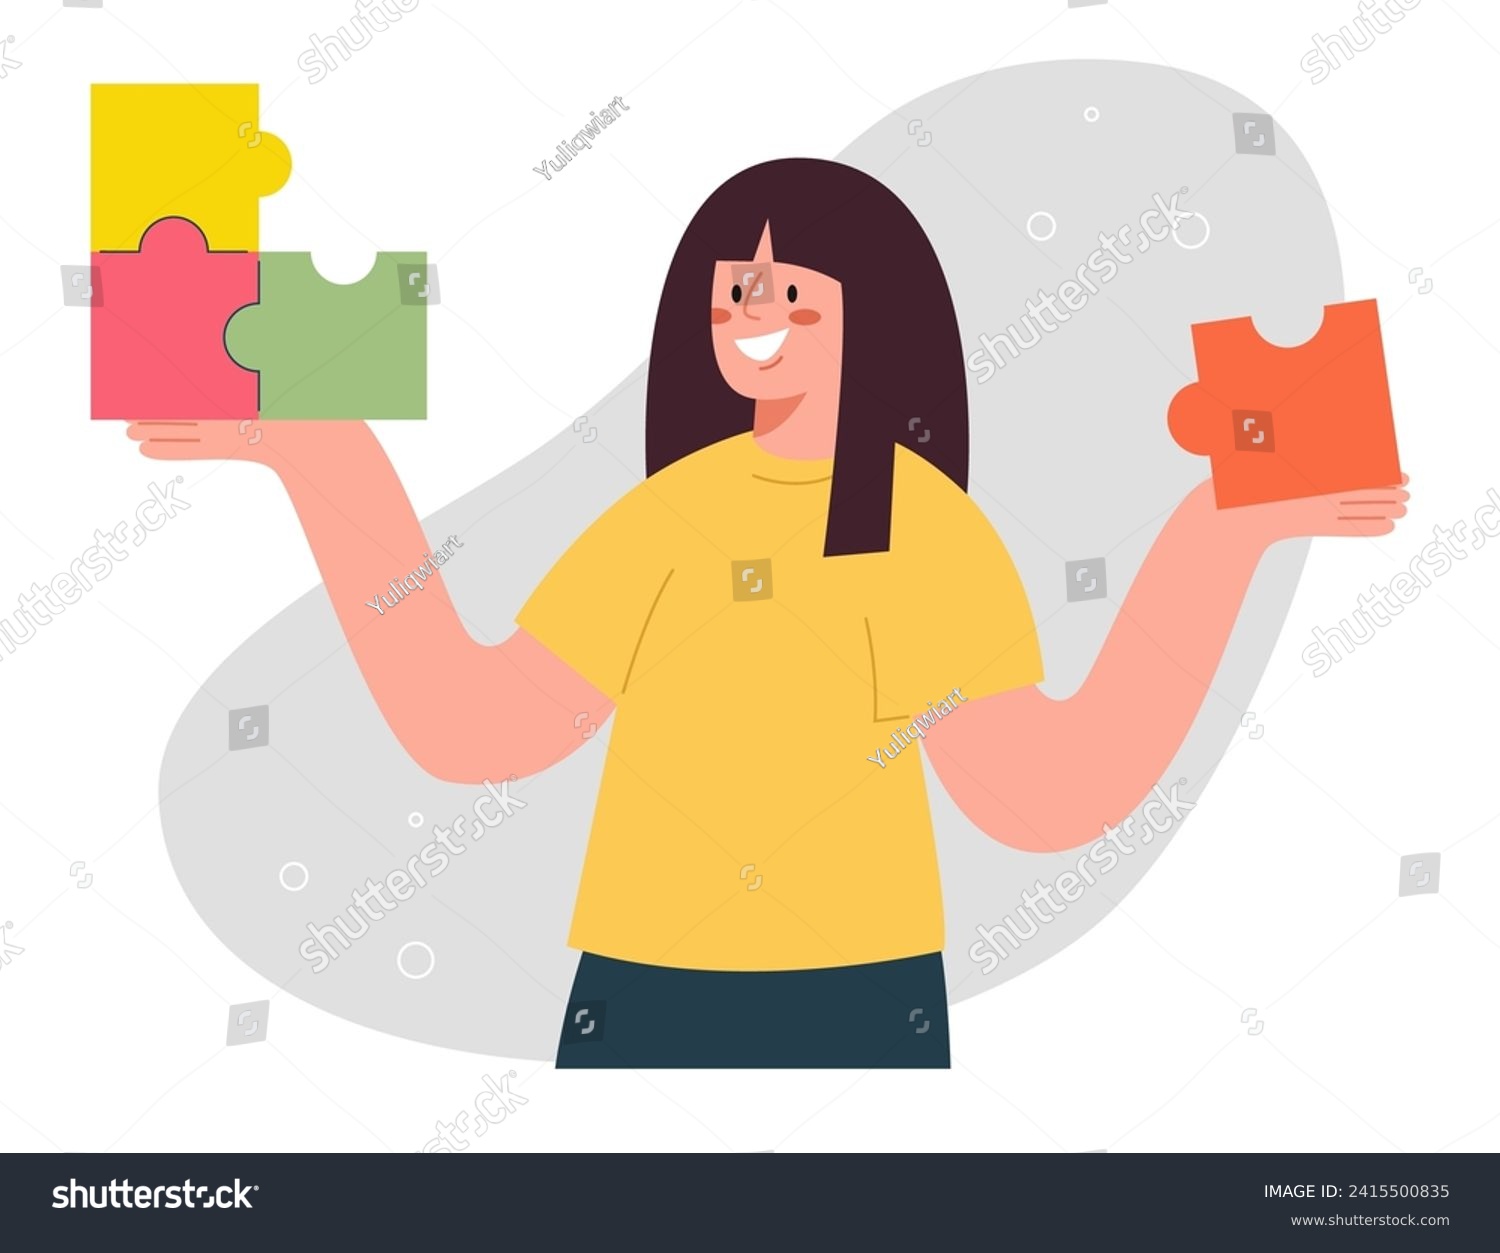 SVG of Achieving business goals, logic and creativity for great success, strategic management in solving complex work problems, thought process for creating successful ideas, woman putting together puzzles. svg